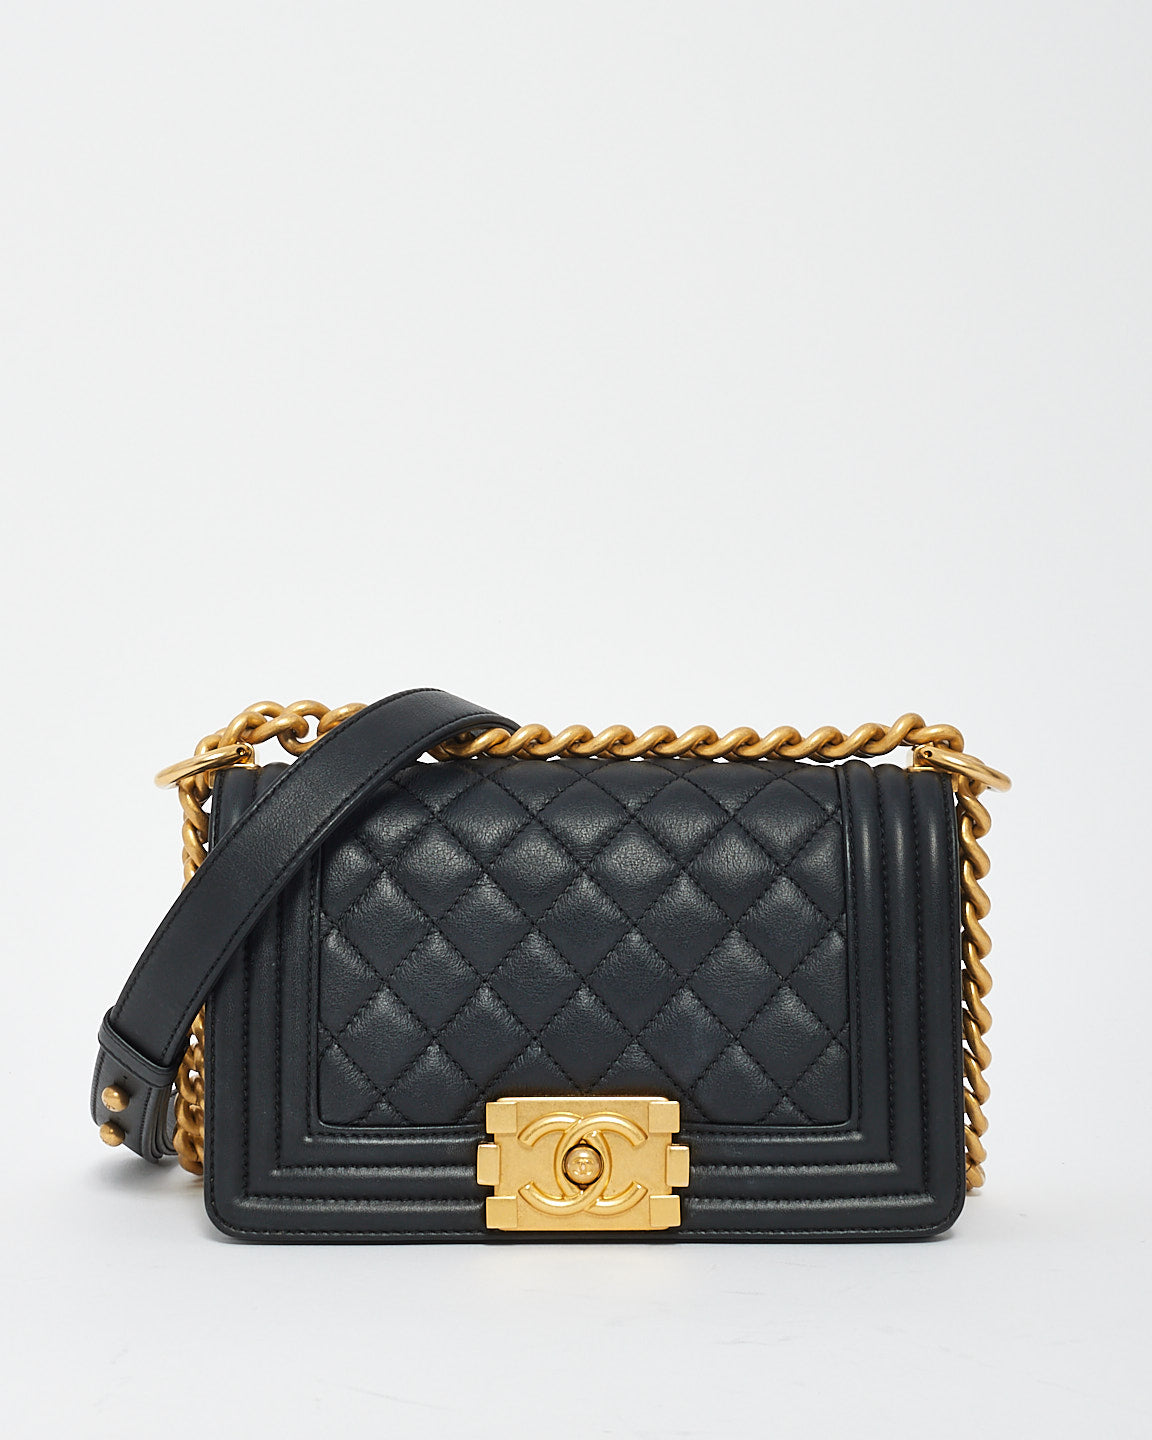 Chanel Black Lambskin Quilted Small Boy Bag GHW